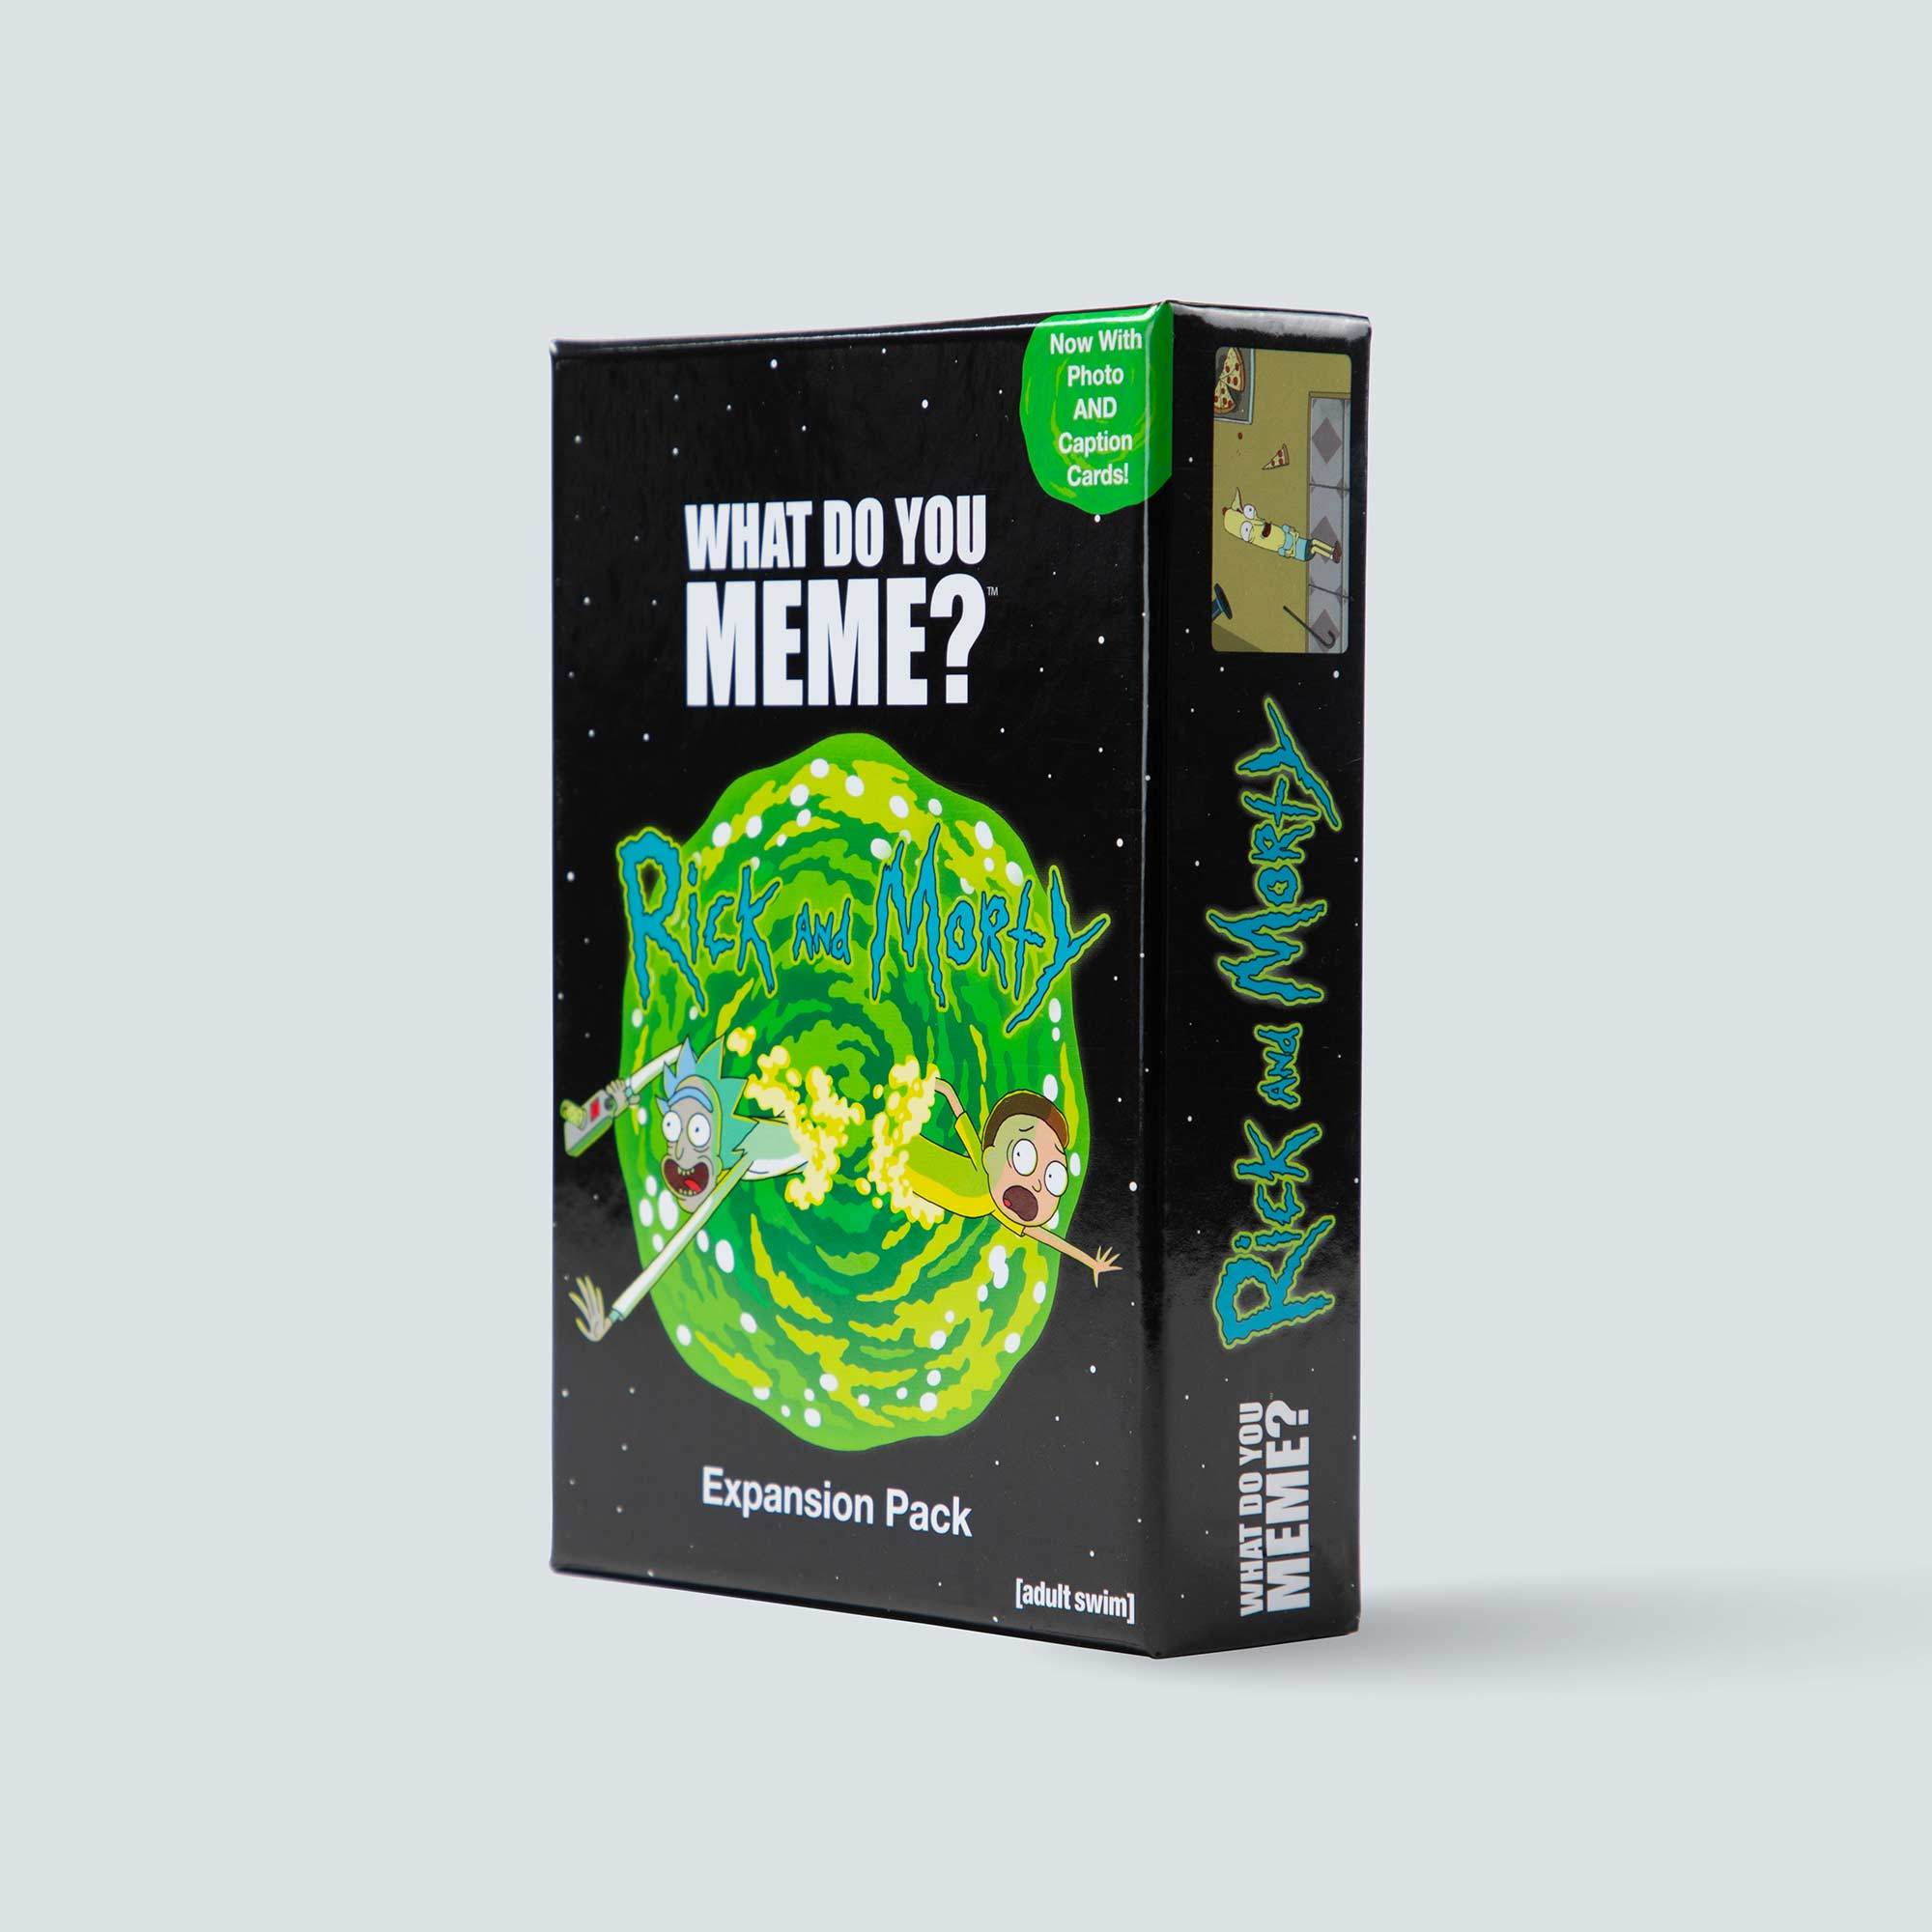 Rick & Morty Expansion Pack for What Do You Meme™ - Adult Party Game